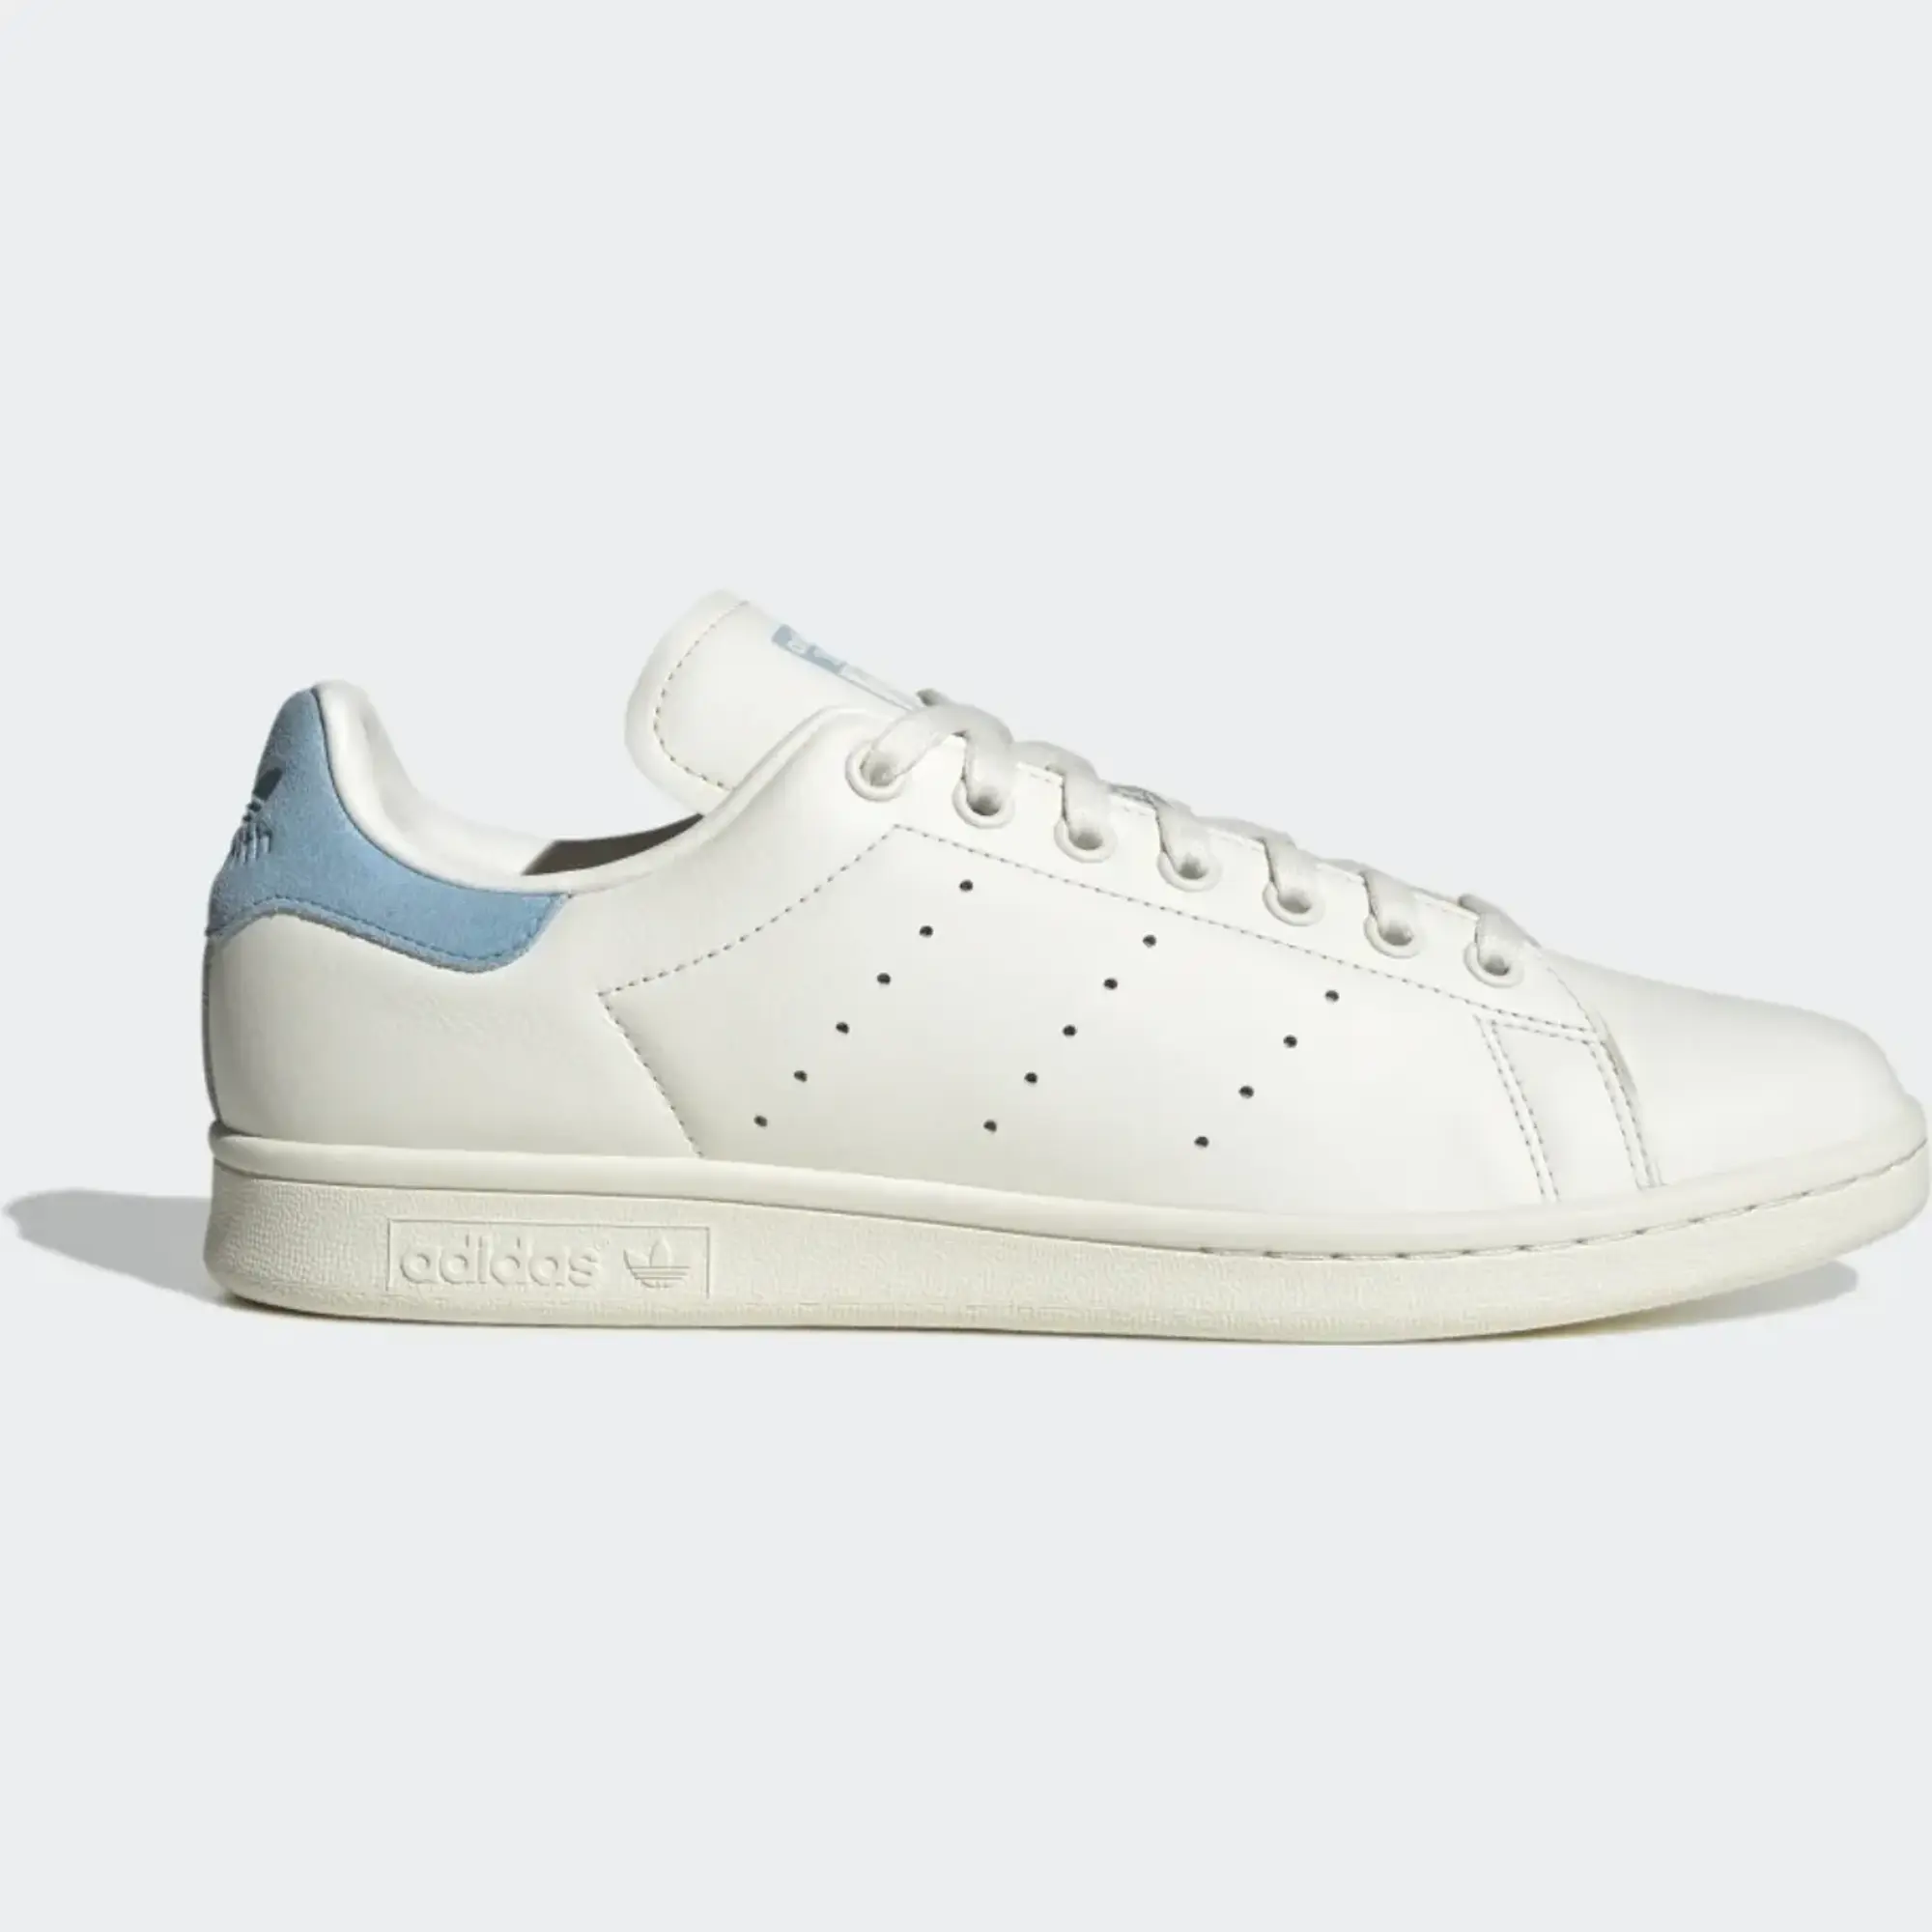 Adidas Originals Stan Smith Trainers In White And Blue